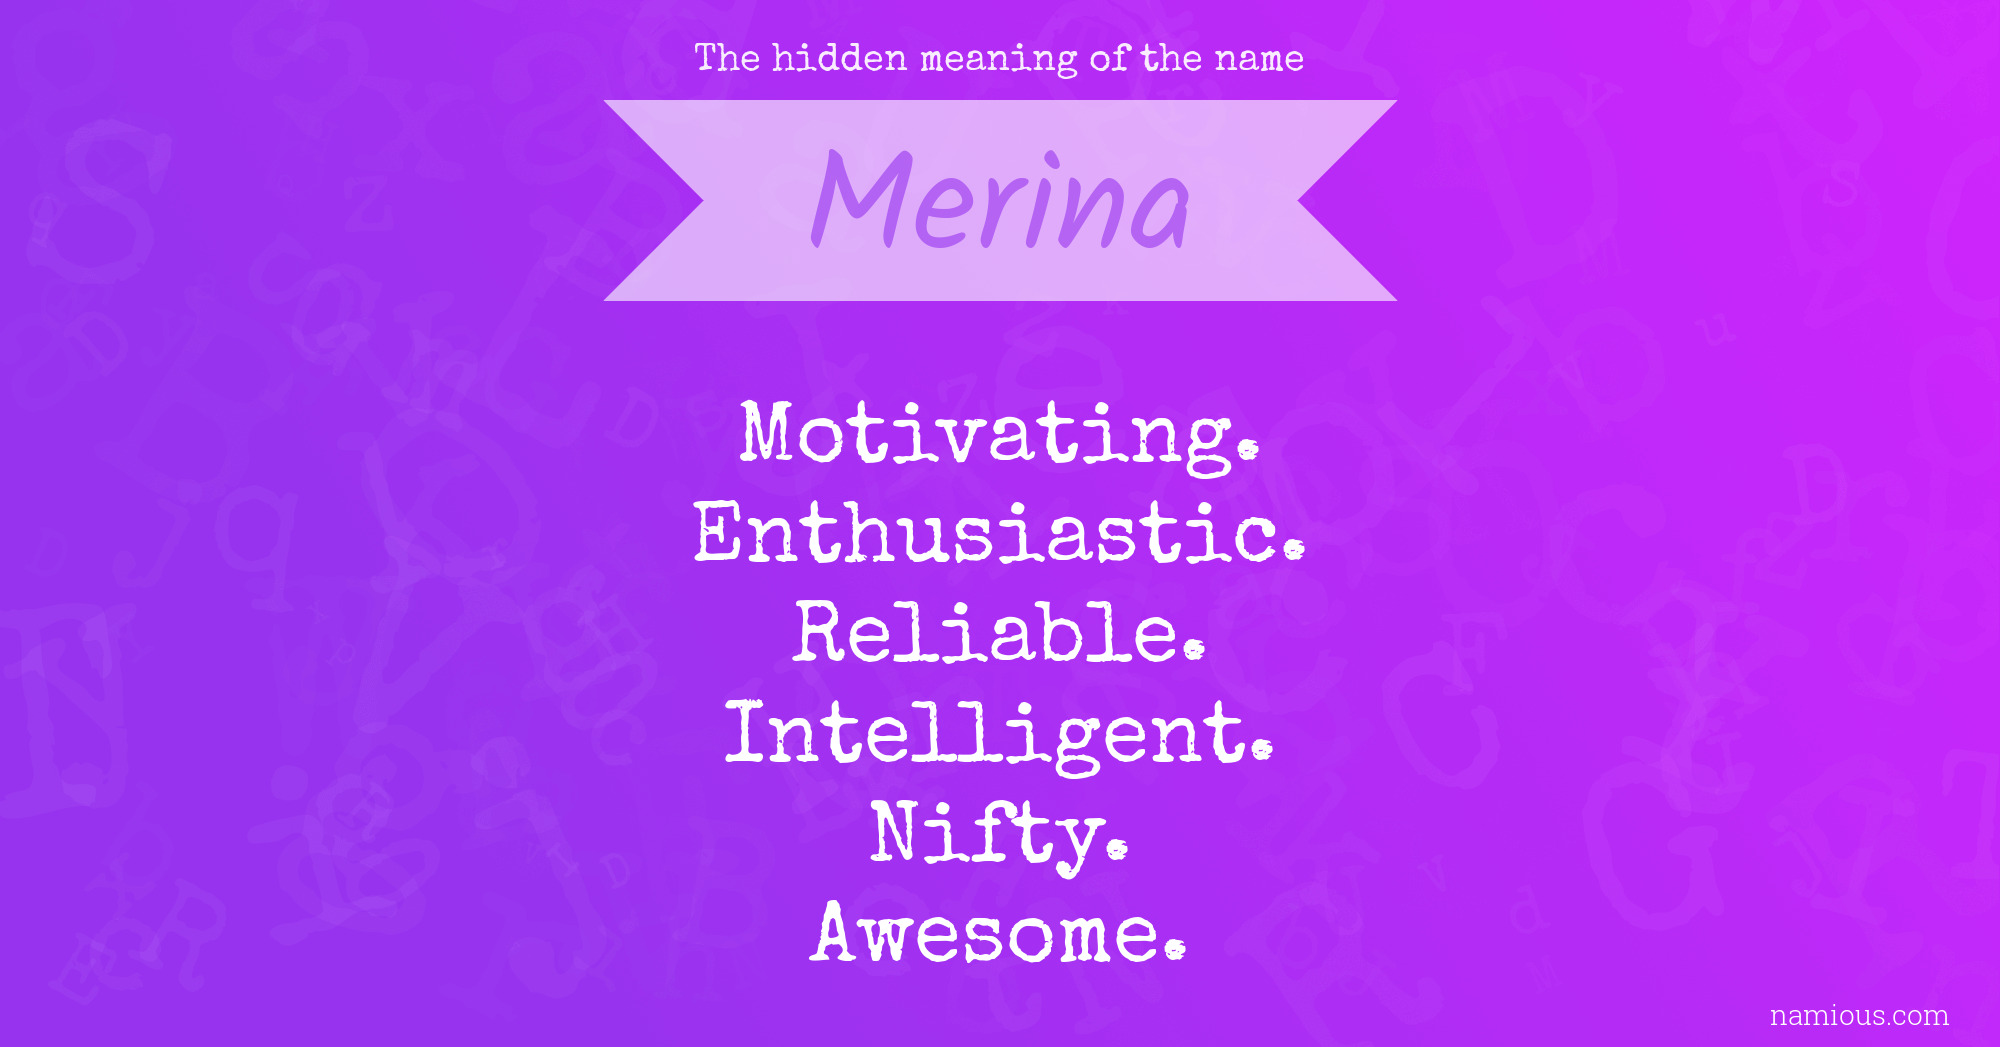 The hidden meaning of the name Merina